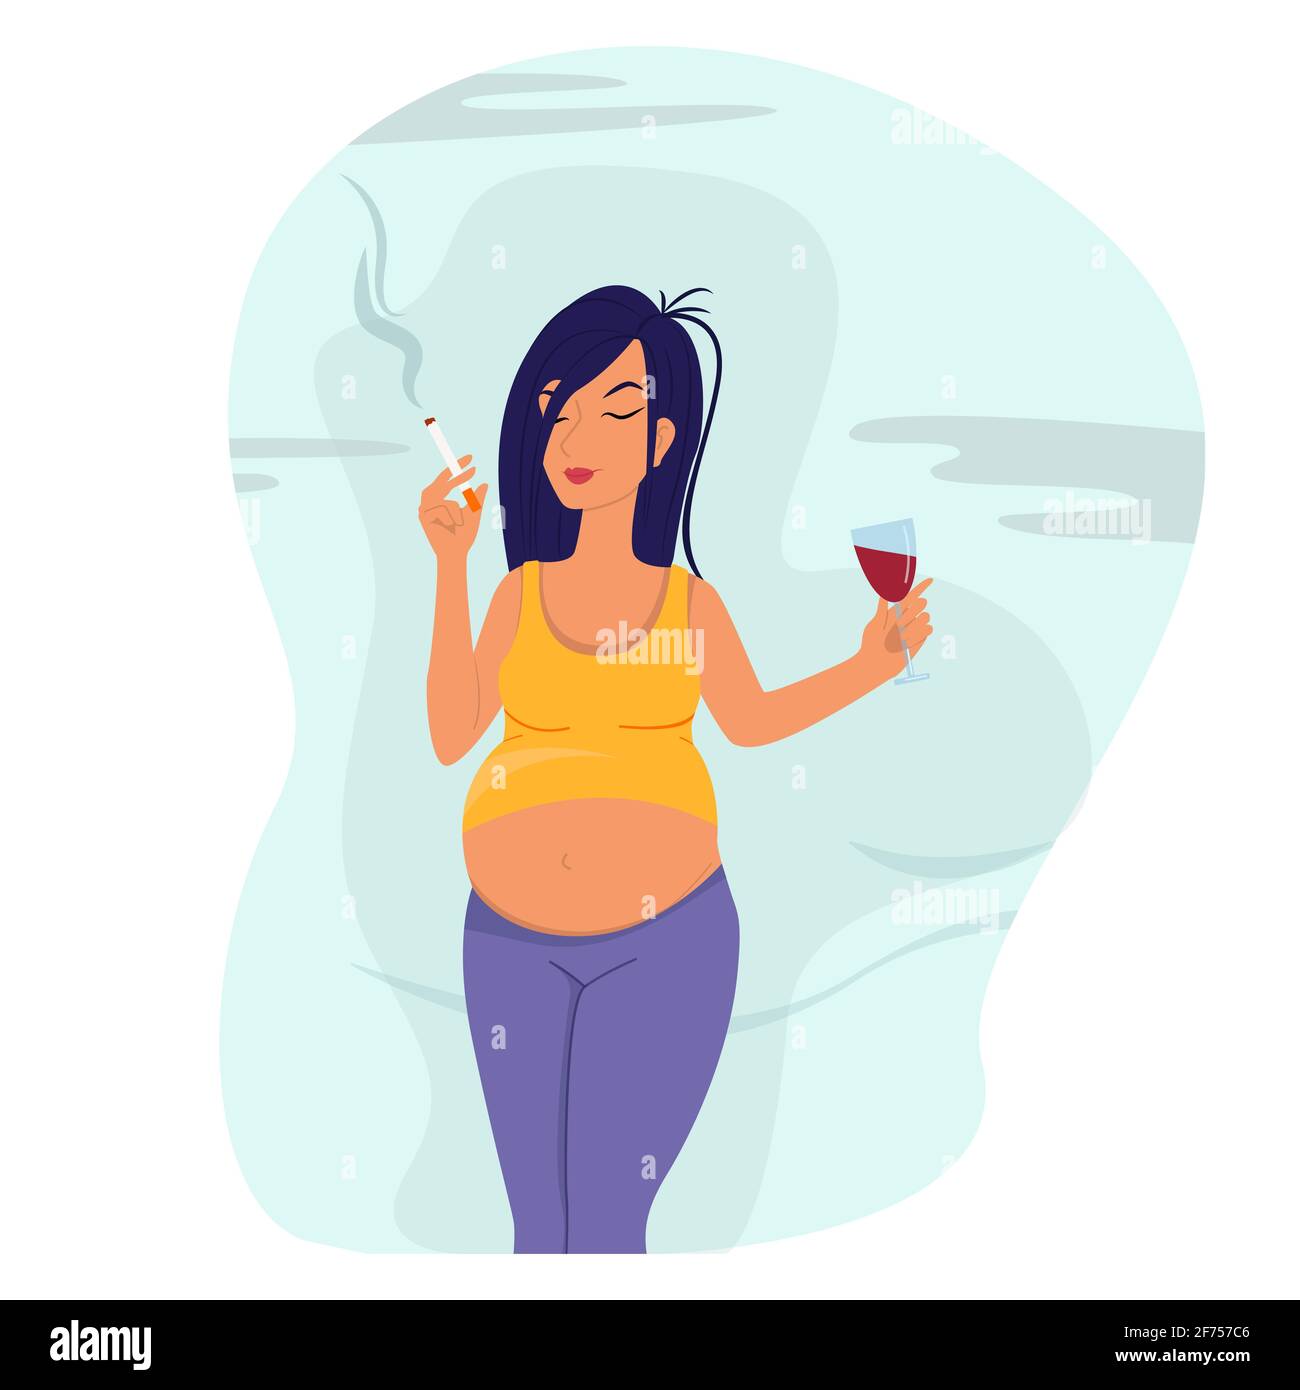 Not A Healthy Lifestyle For A Pregnant Woman Concept. Stock Vector